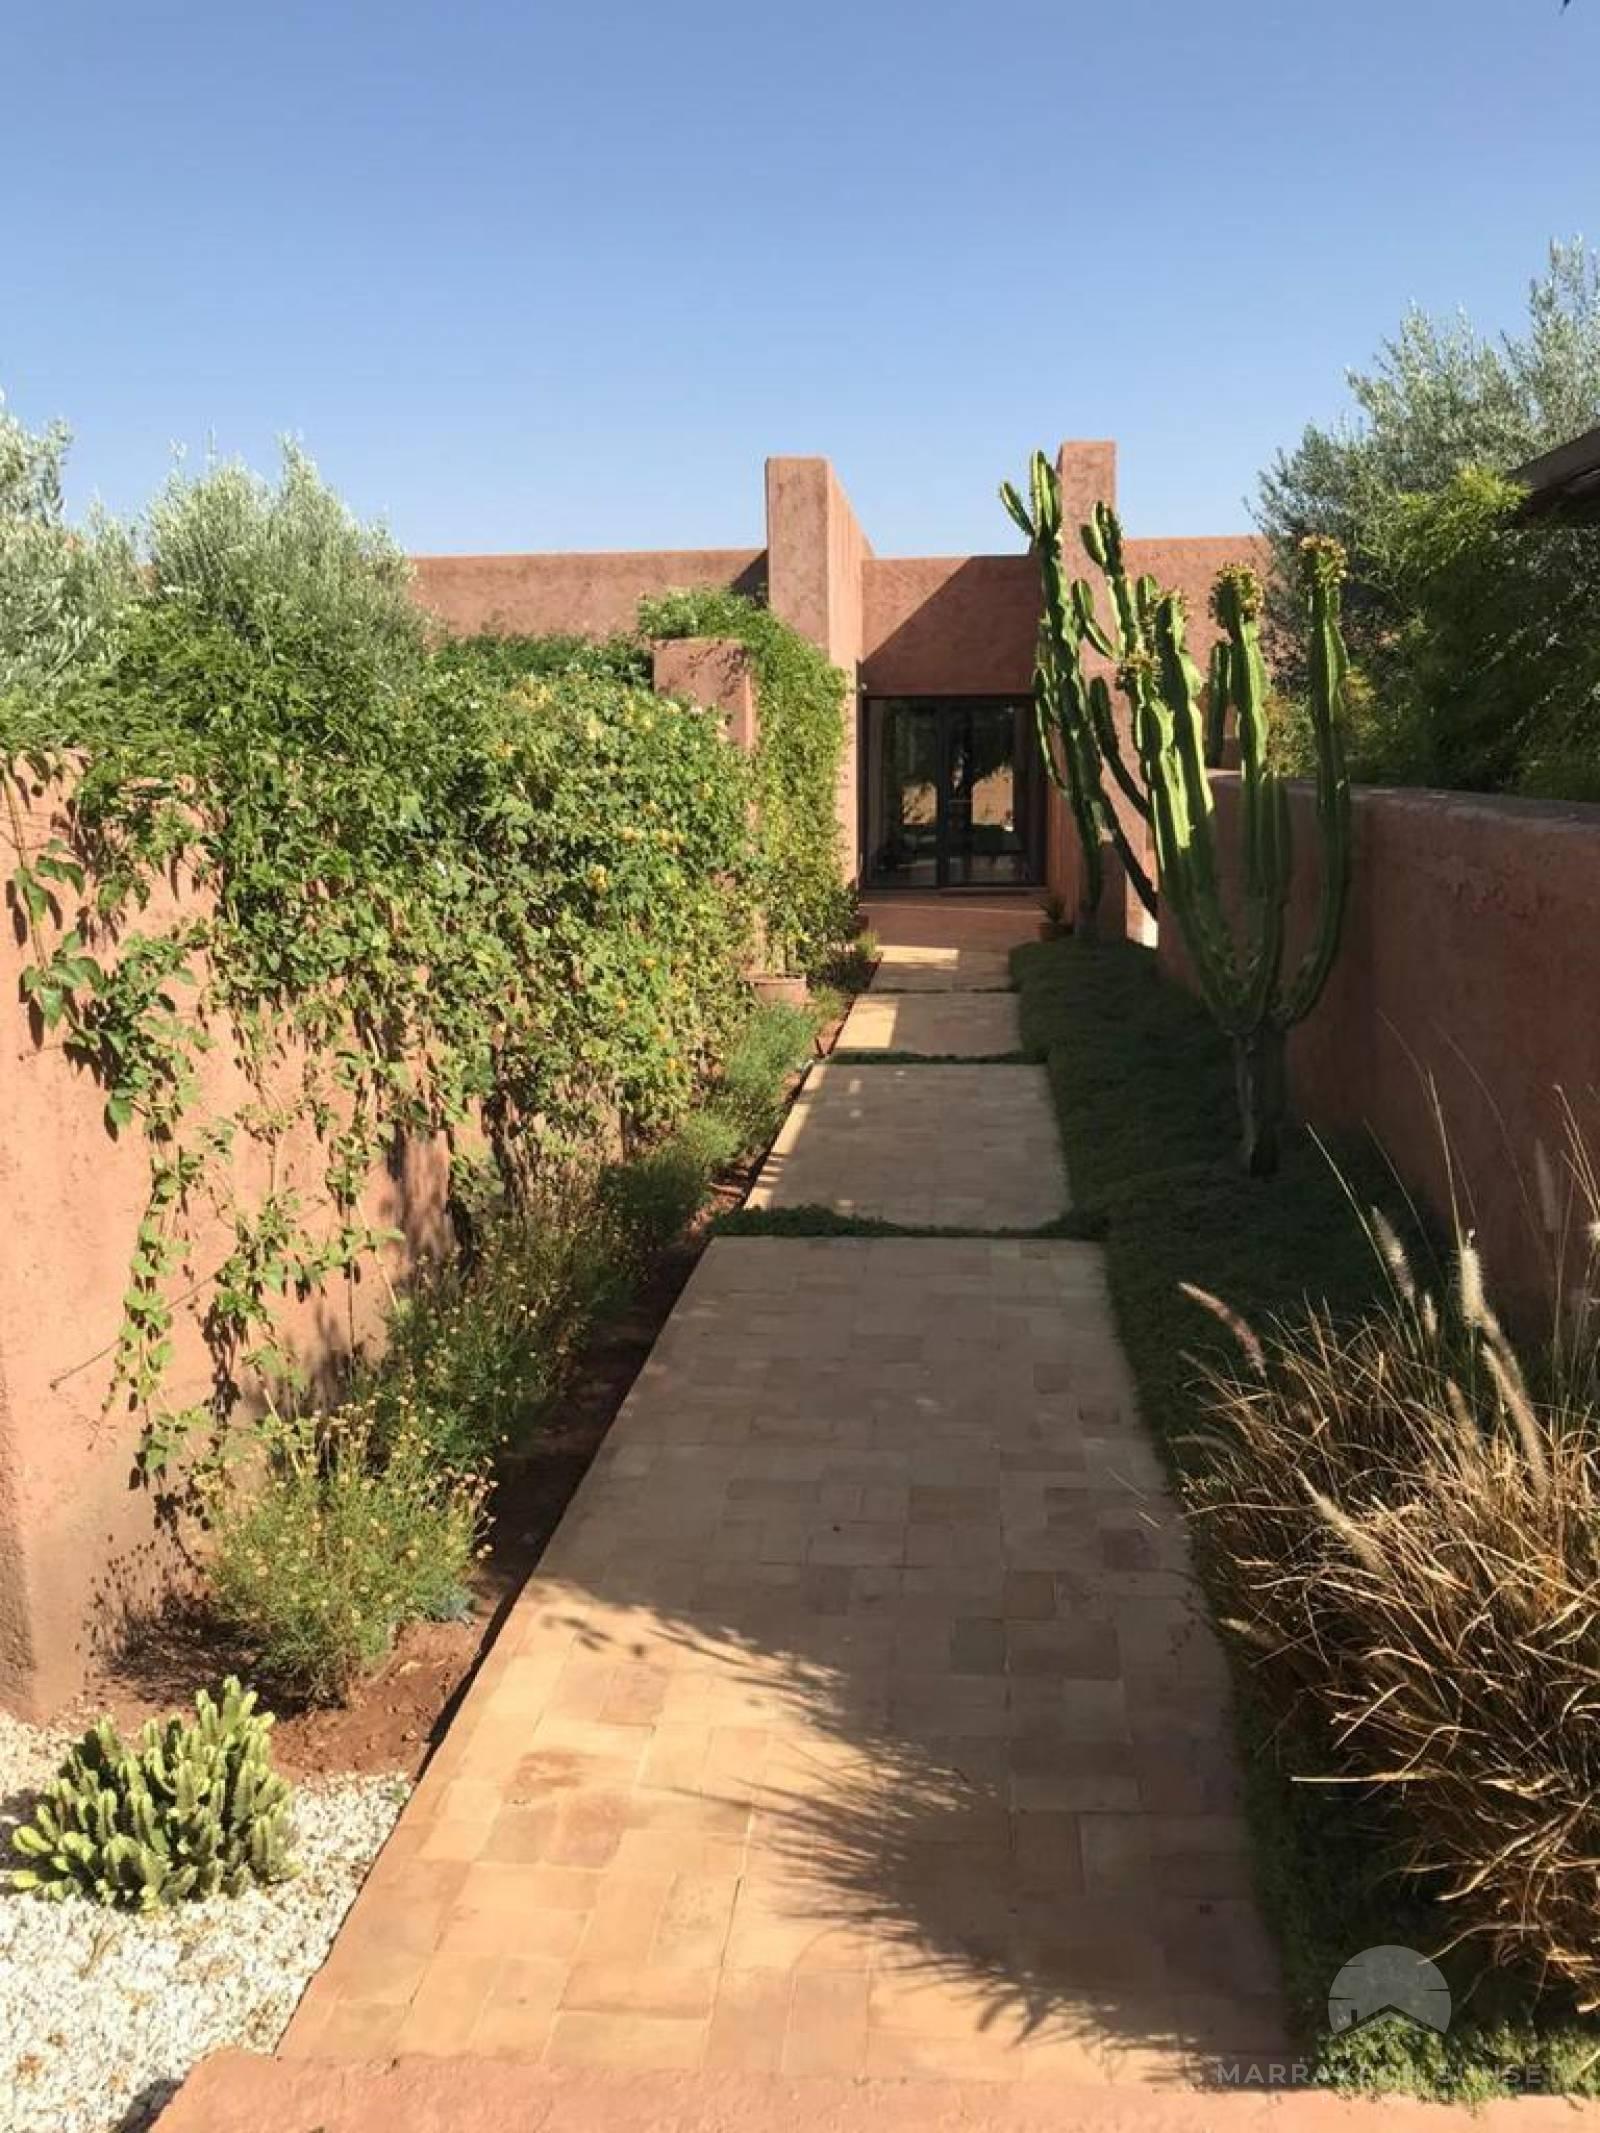 Luxury Villa for sale Marrakech in one of the most prestigious residential & golf complex in Marrakech